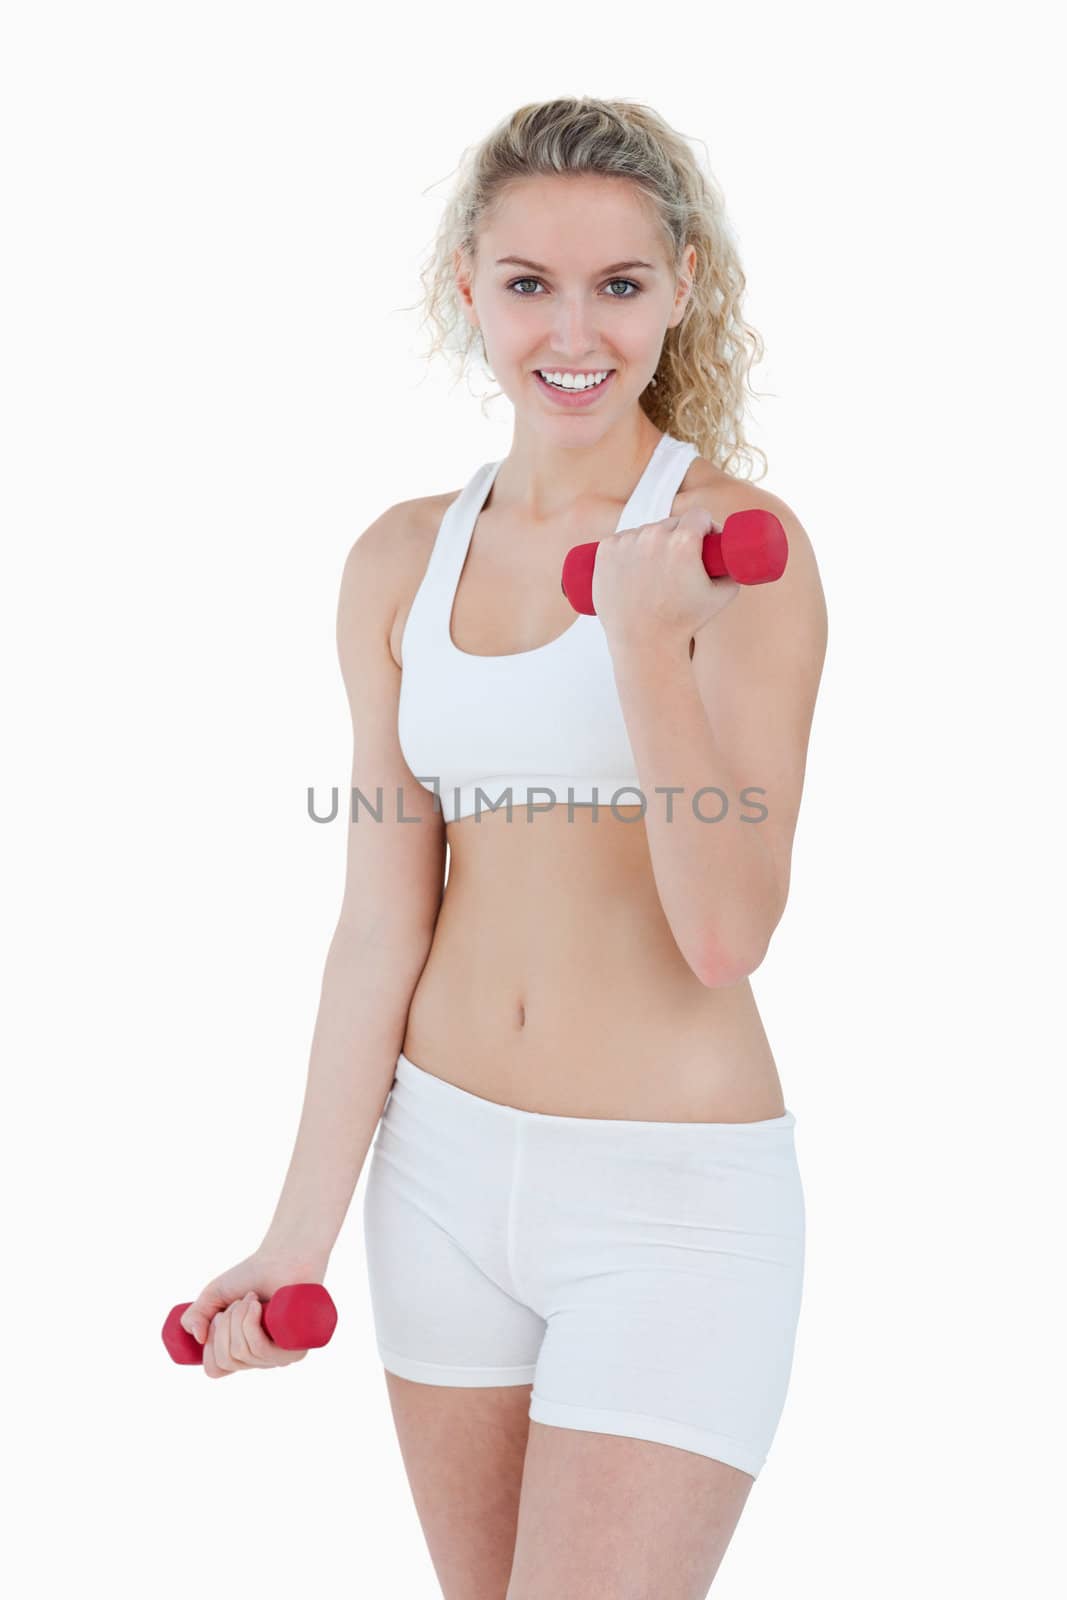 Smiling teenager looking at the camera while lifting weights by Wavebreakmedia